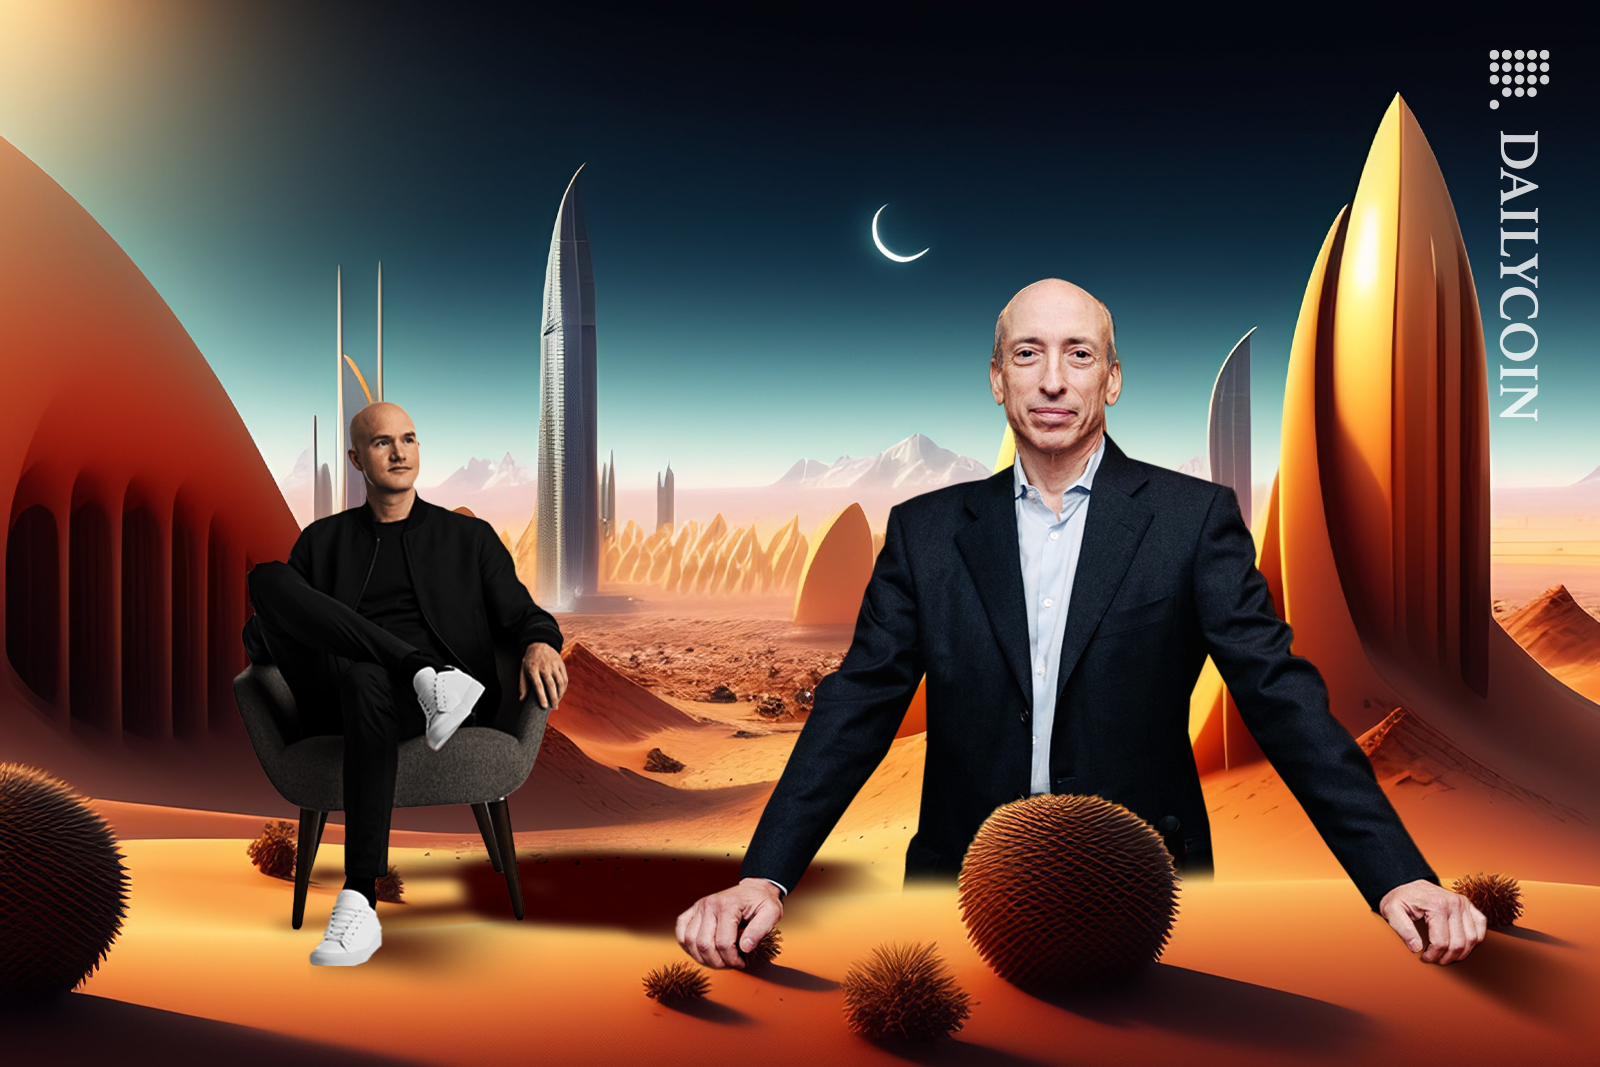 Brian Armstrong sitting on a chair in the middle of the futuristic desert city next to SEC chair Gary Gensler half buried in sand.